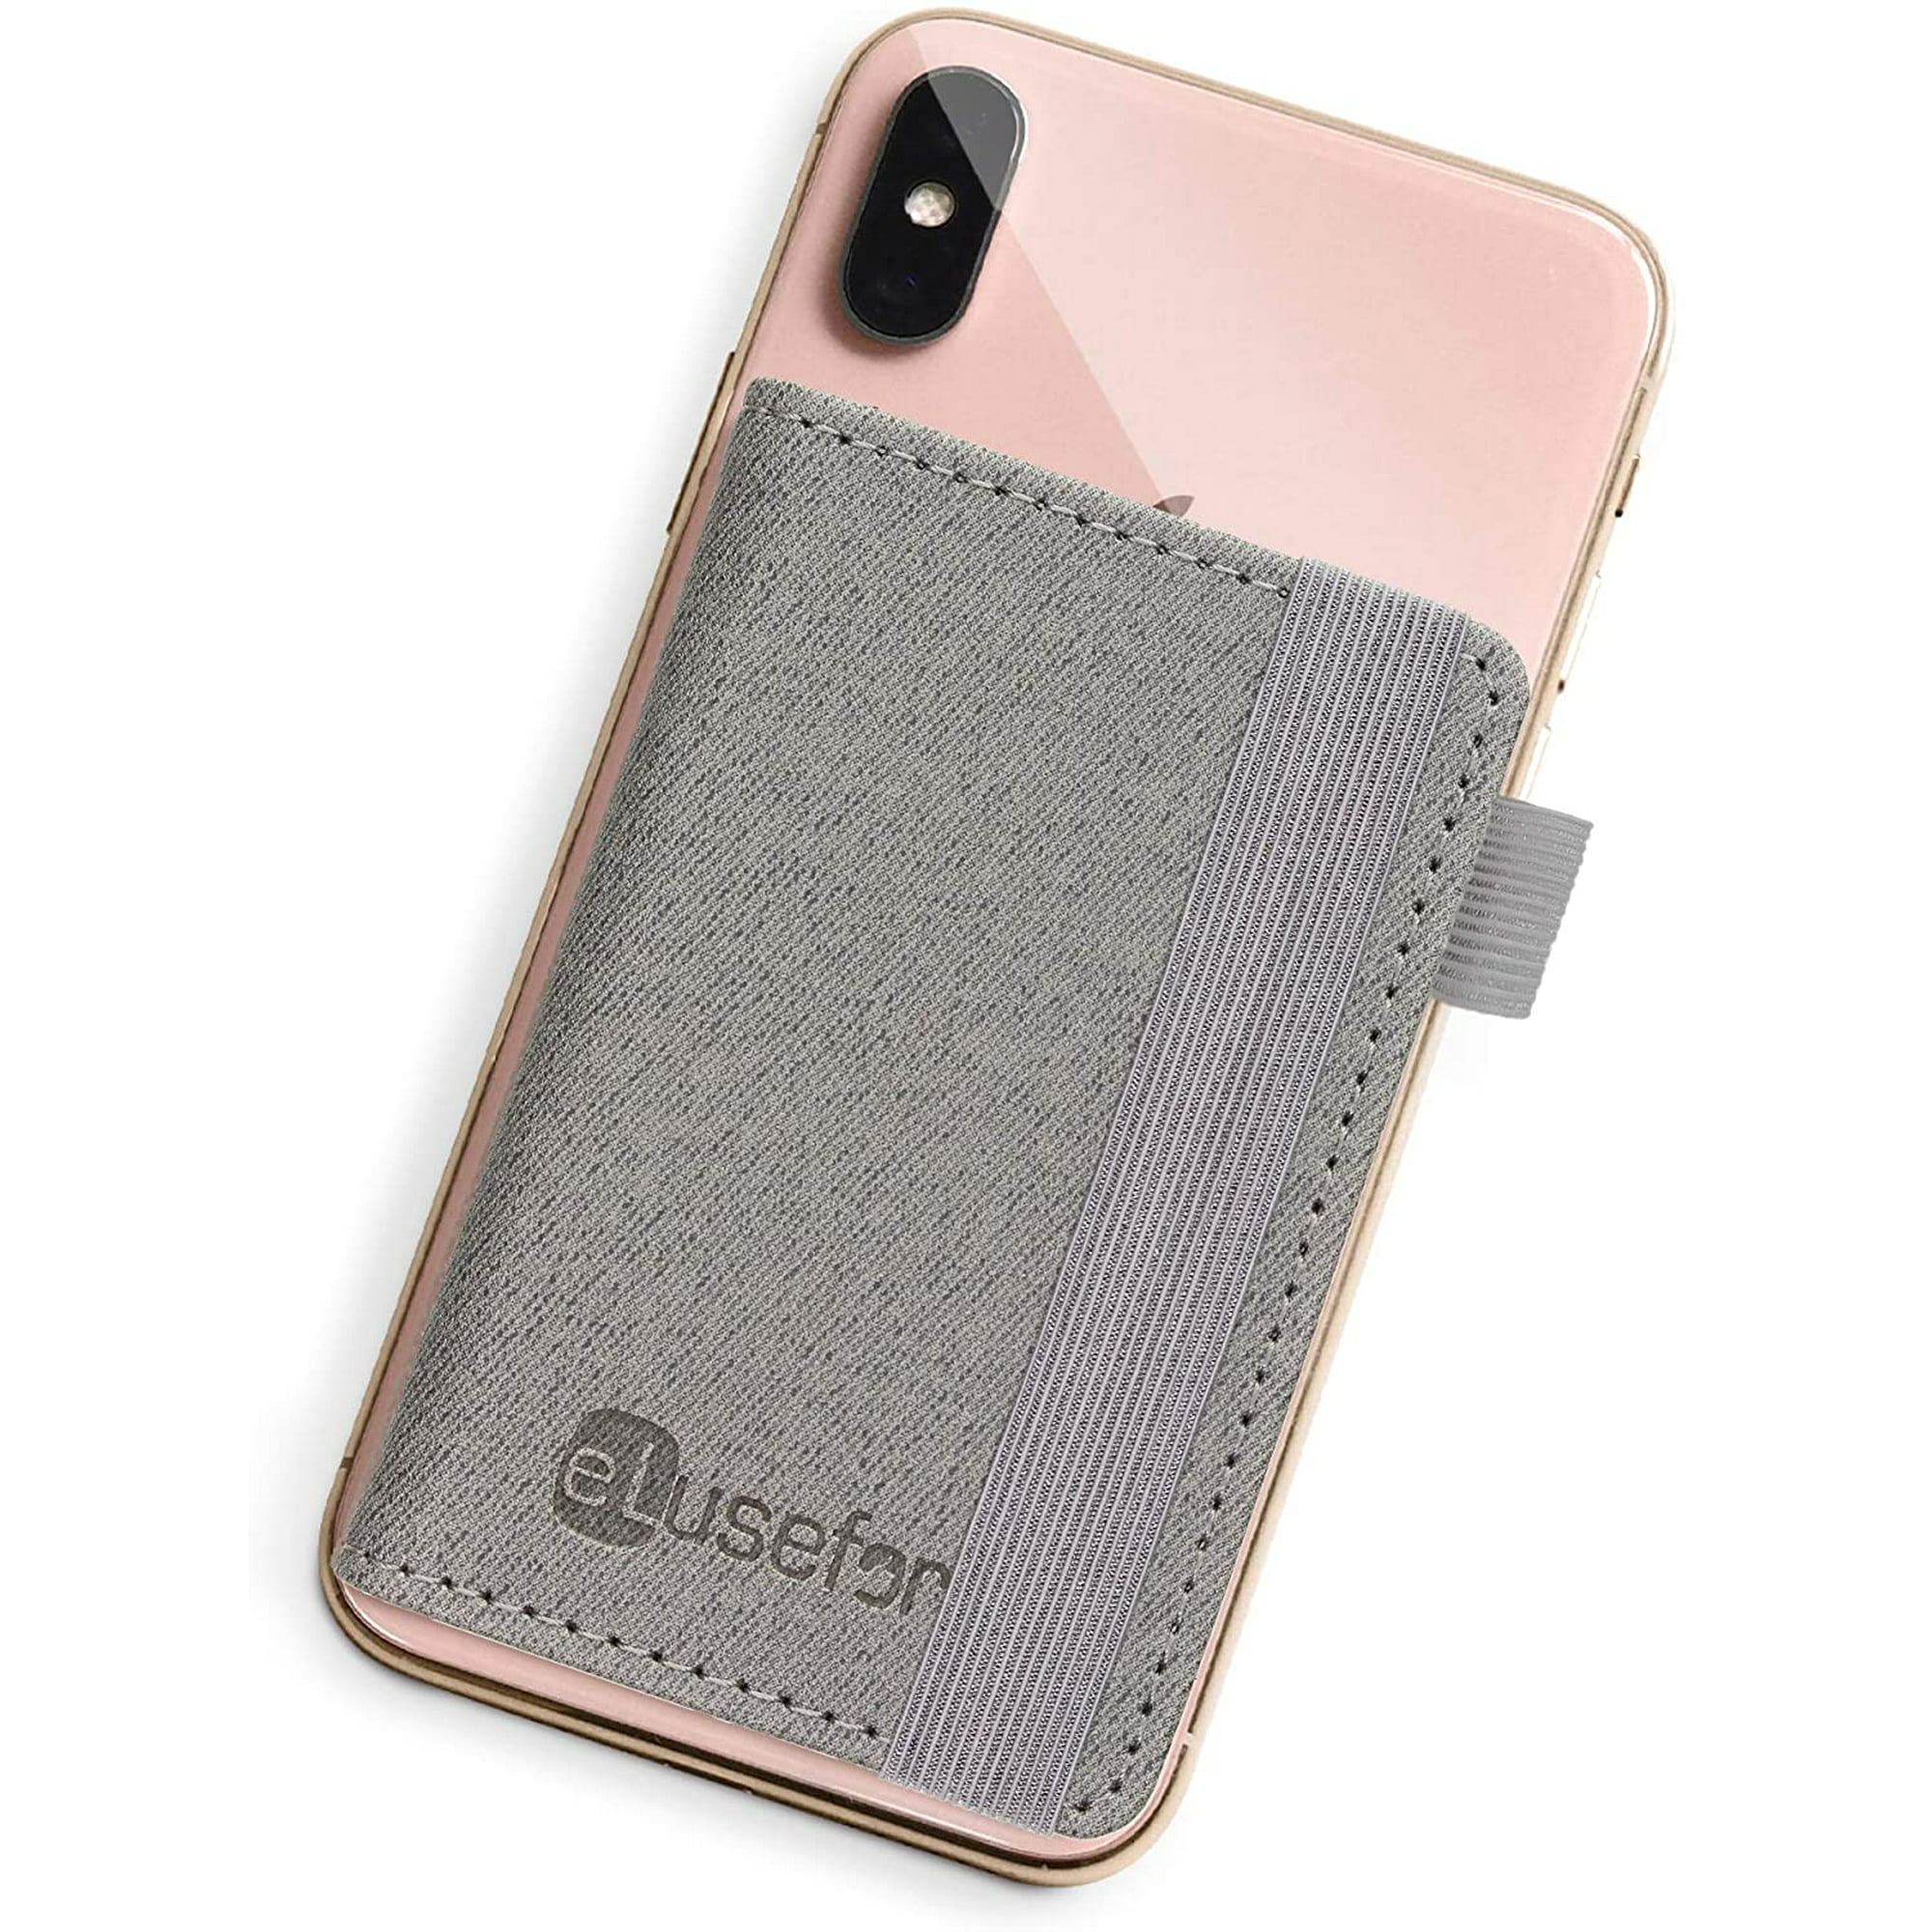 Stick-On Phone Wallet for Back of iPhone or Android Case | 6 Sleeve Credit Card  Holder - Pocket for Cards, Money & ID - Built-in Stand - Waterproof  Material - Travel, Work